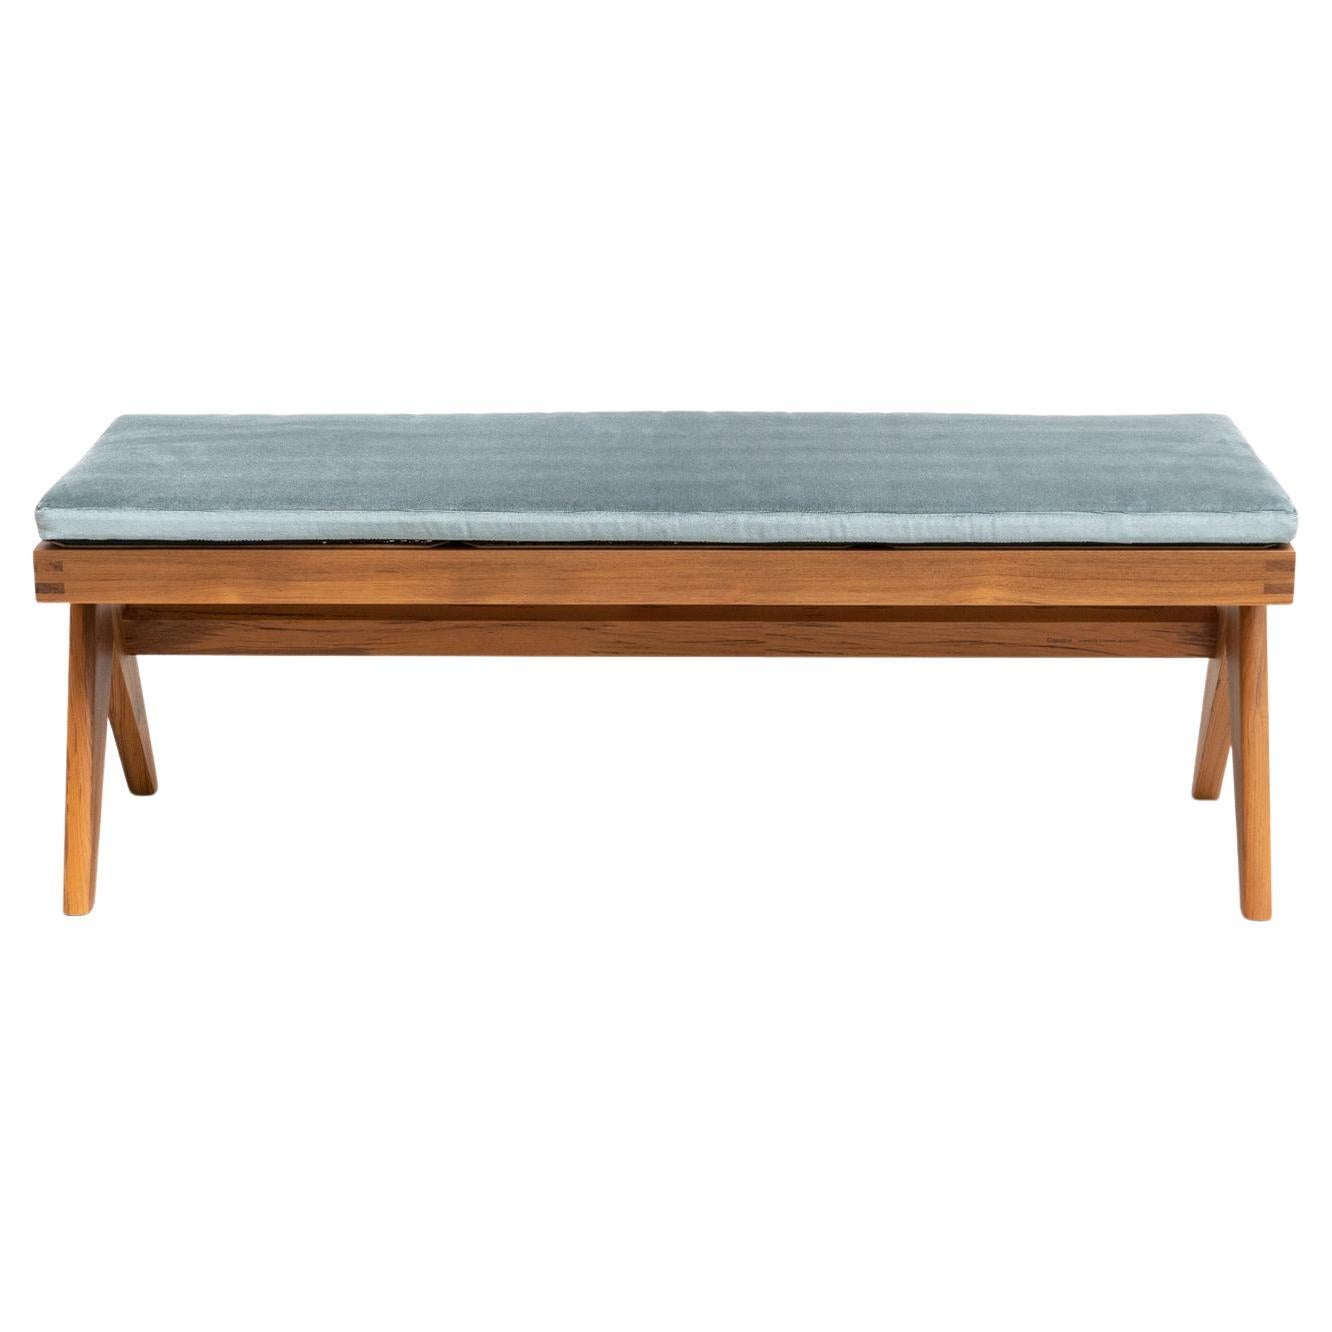 P. Jeanneret Civil Bench, Wood and Woven Viennese Cane with Cushion by Cassina